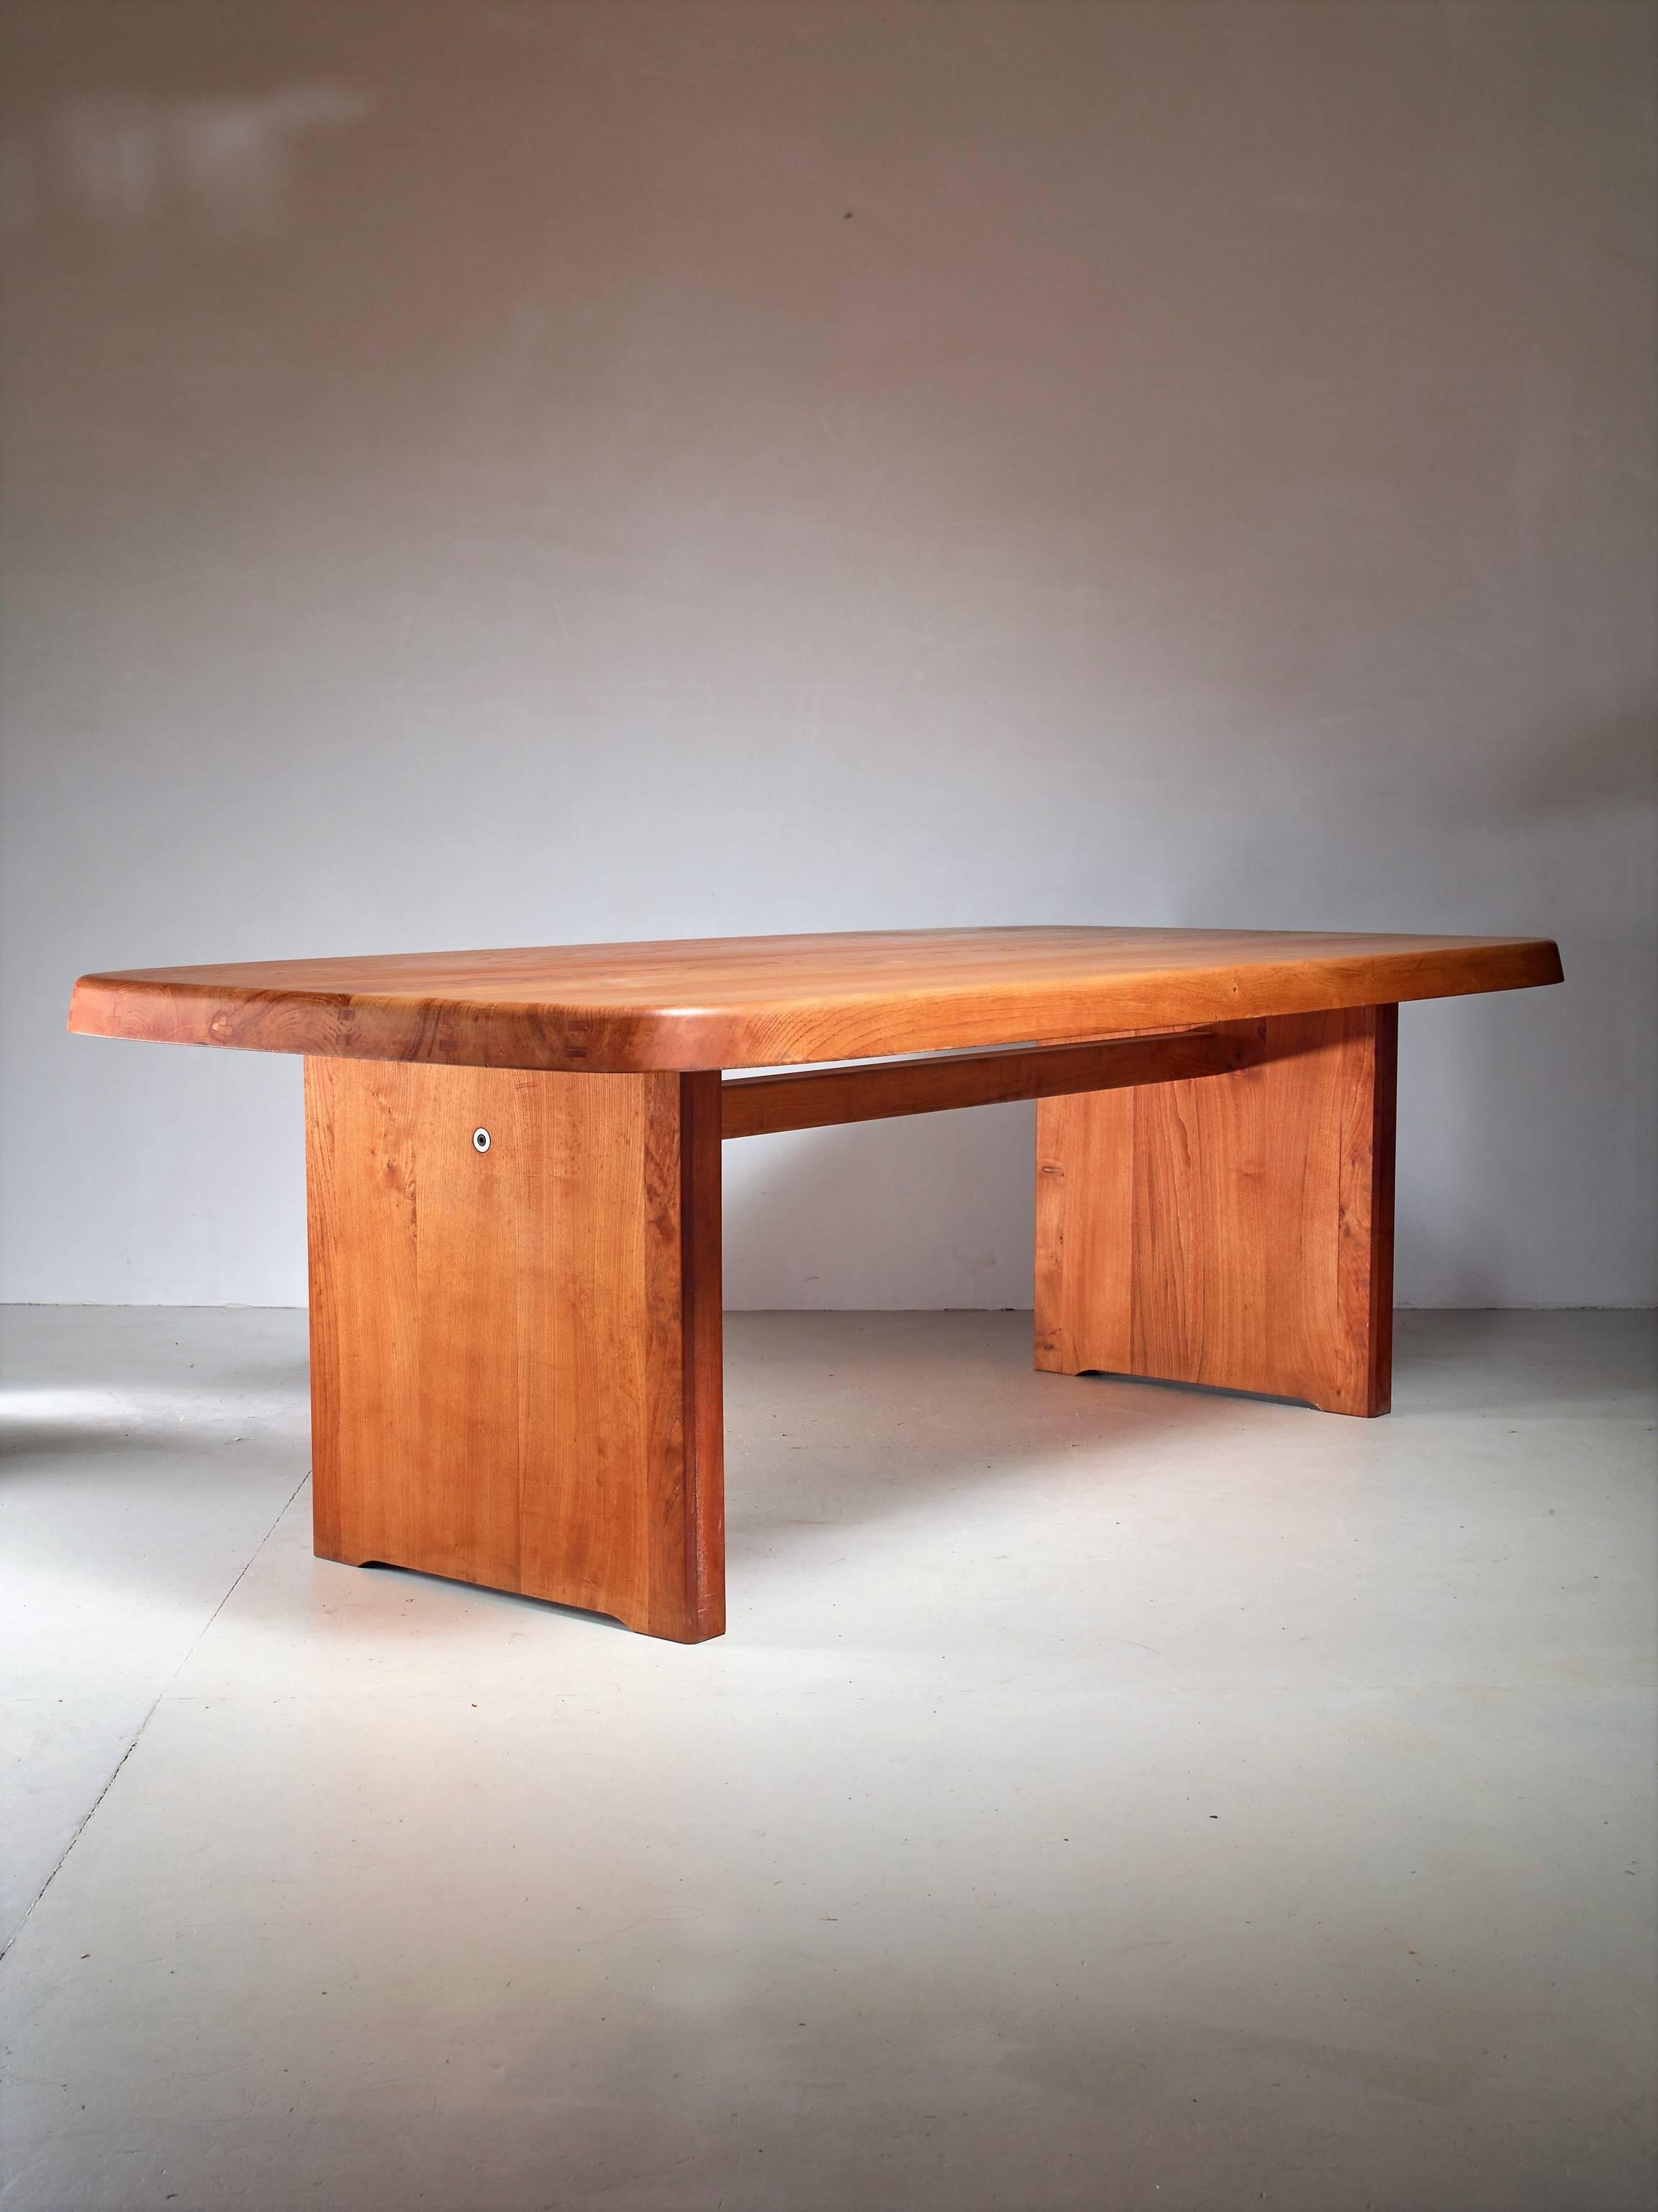 A customized version of Pierre Chapo's T20 dinner table in elm from the 1960s. This large table is suitable for ten chairs and has a solid, 8 cm thick, top. The table is a bit shorter yet wider than the standard model and, contrary to the normal